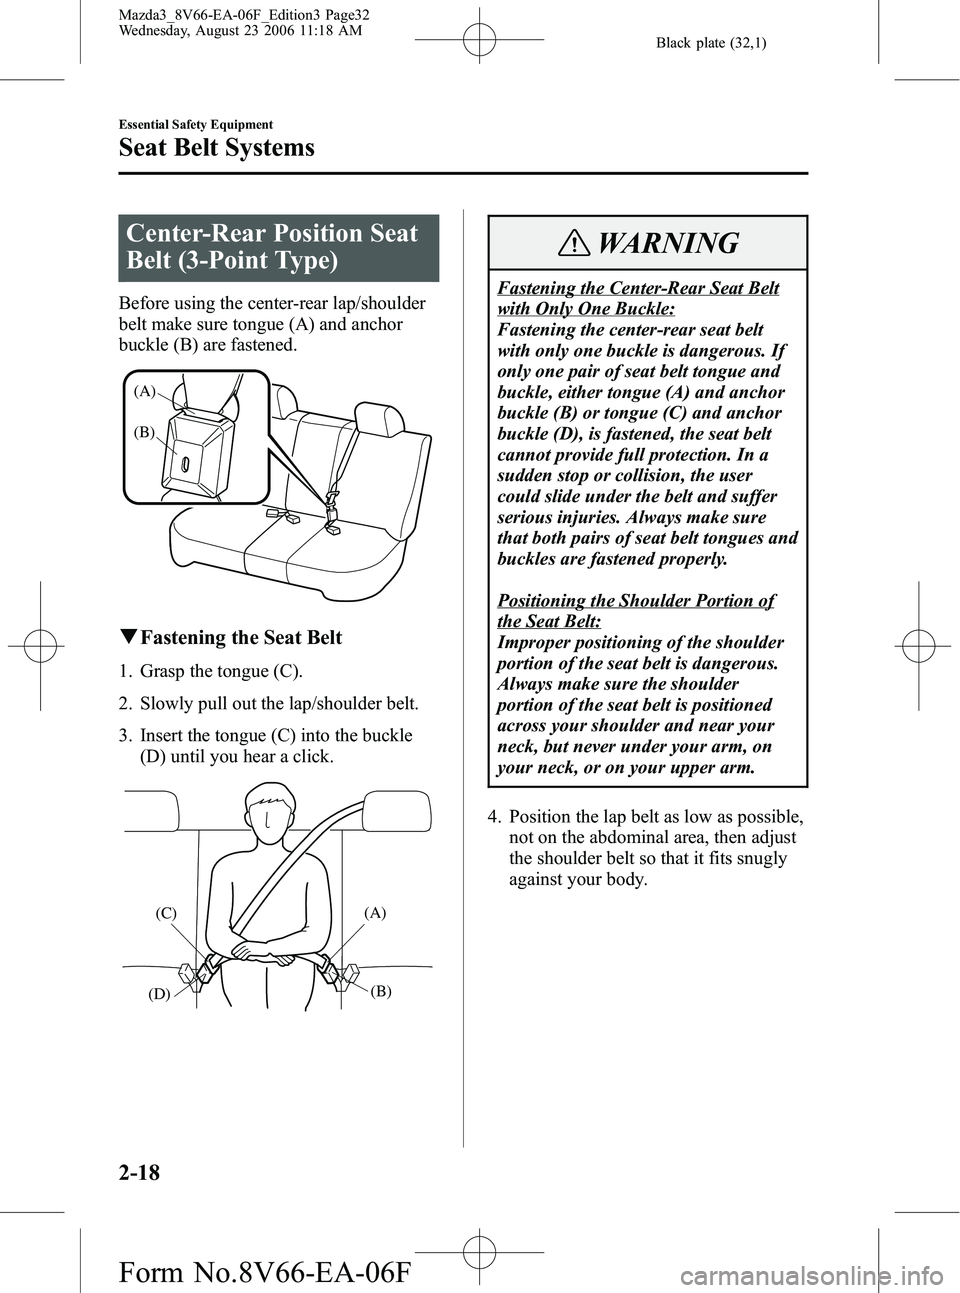 MAZDA MODEL 3 5-DOOR 2007 Owners Guide Black plate (32,1)
Center-Rear Position Seat
Belt (3-Point Type)
Before using the center-rear lap/shoulder
belt make sure tongue (A) and anchor
buckle (B) are fastened.
(A)
(B)
qFastening the Seat Bel